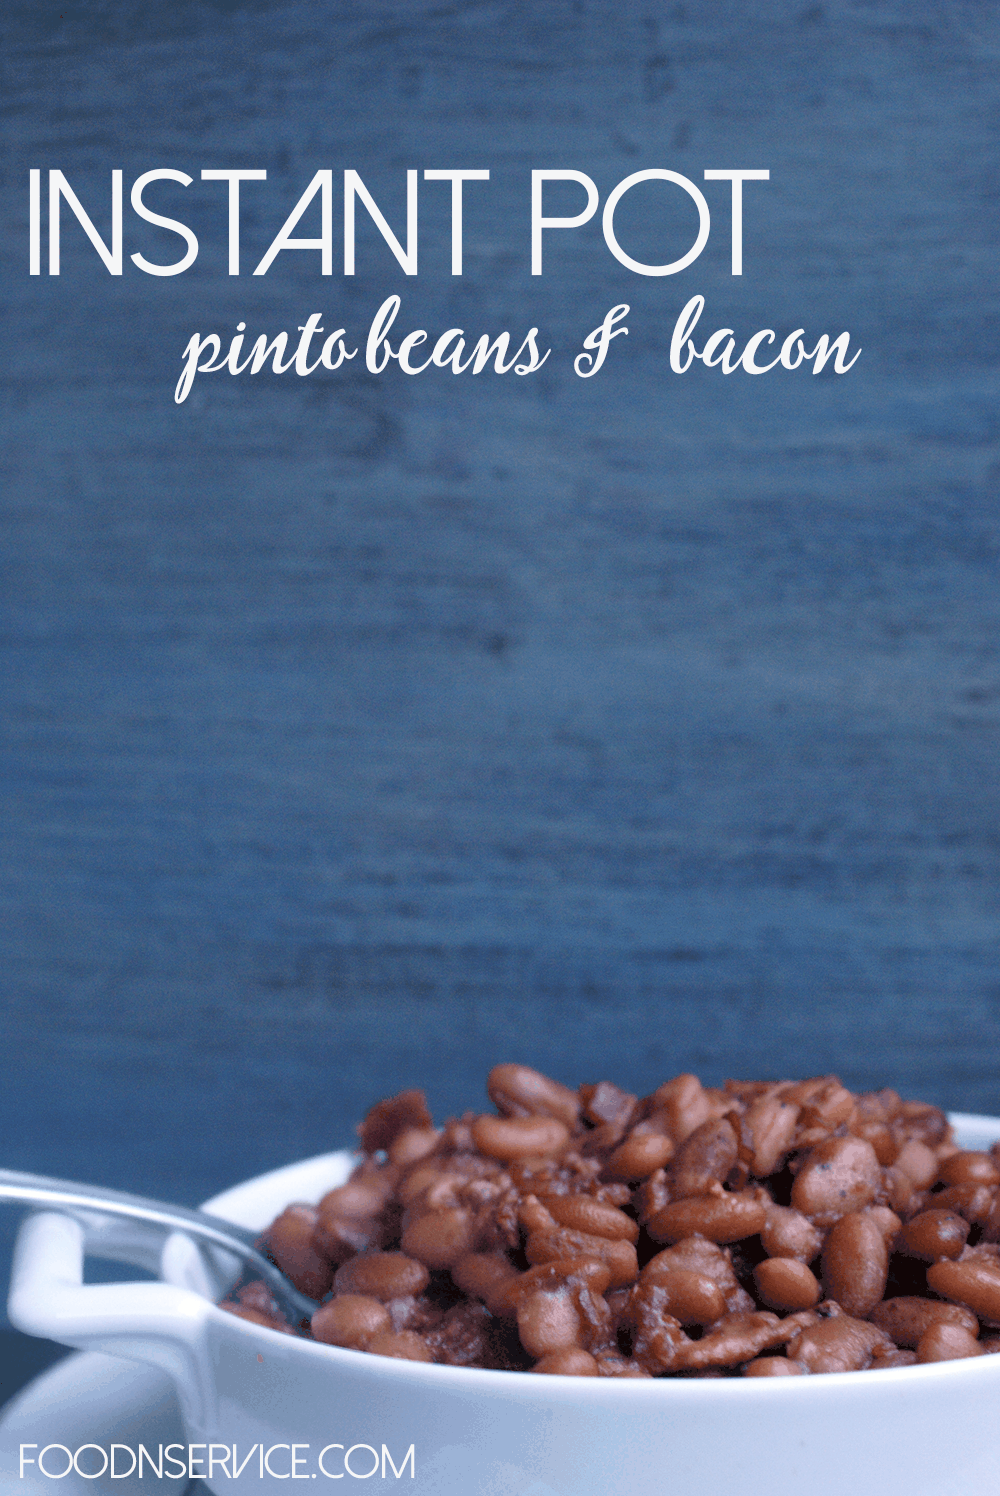 Instant Pot Pinto Beans and Bacon Recipe That You